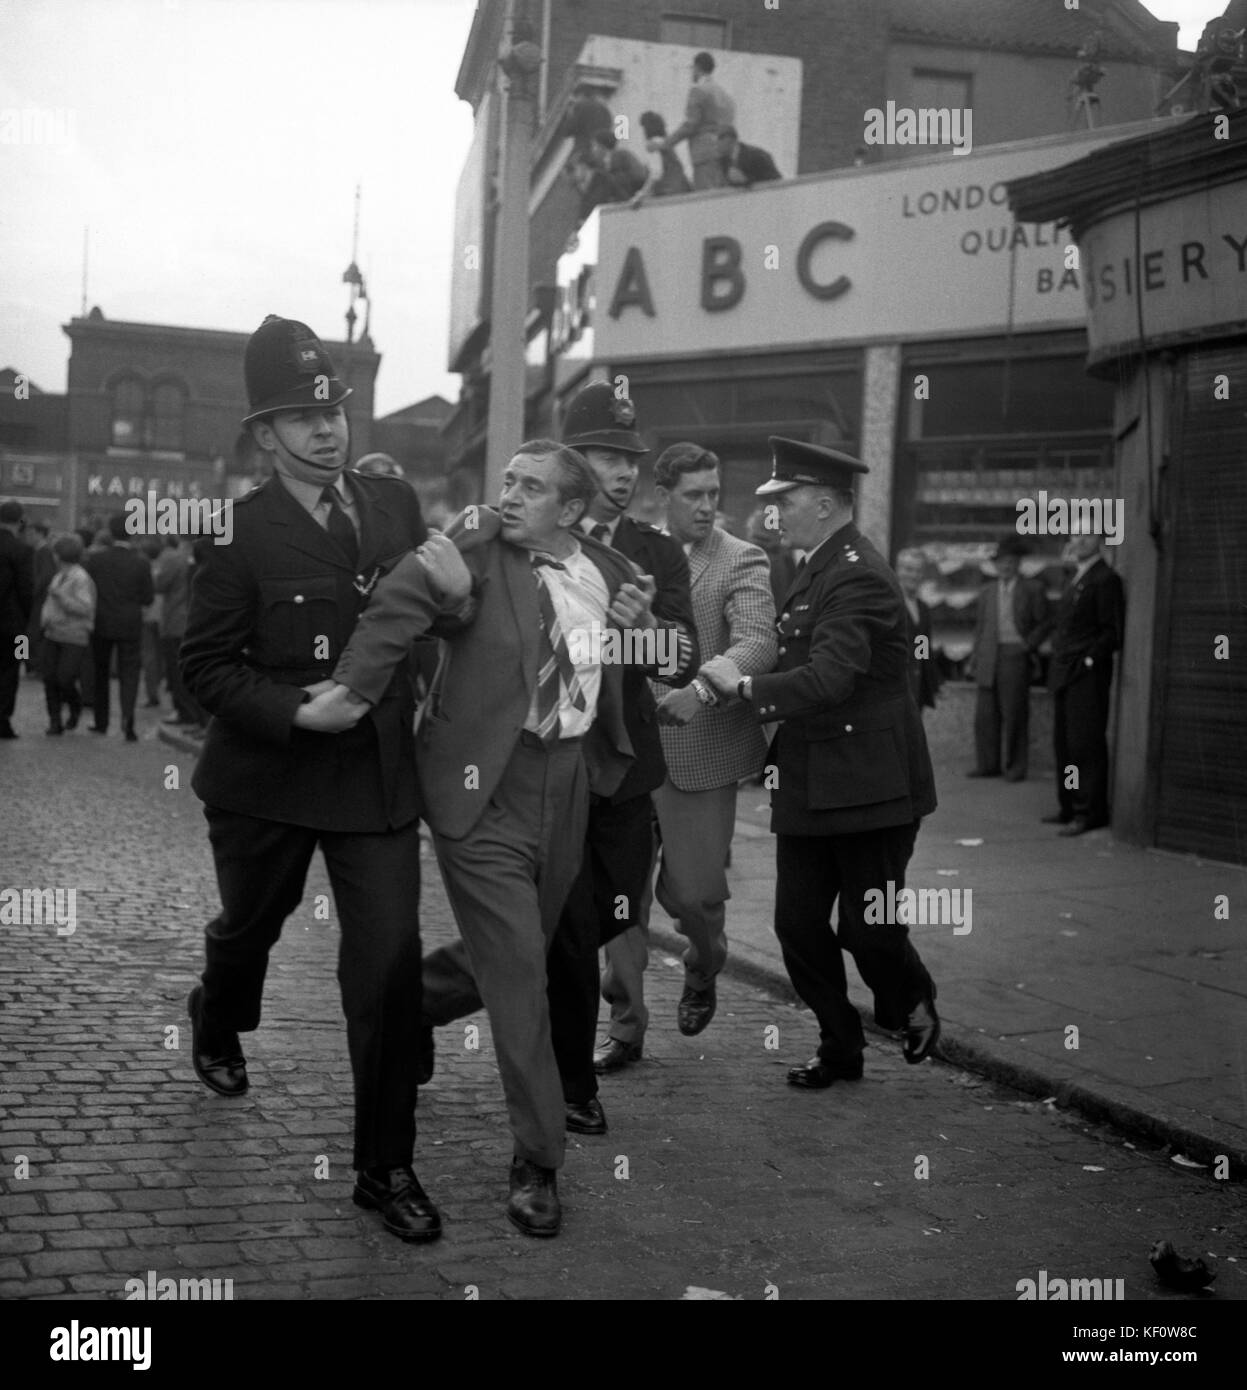 Two men are hustled away in the grip of police at the stormy meeting of Sir Oswald Mosley's Union Movement at Ridley Road, Dalston, London. With a strong police presence controlling the crowd, Sir Oswald attempted to address the meeting amid shouts and boos. There were scuffles and a number of arrests were made. Sir Oswald ended the meeting on police advice. Stock Photo